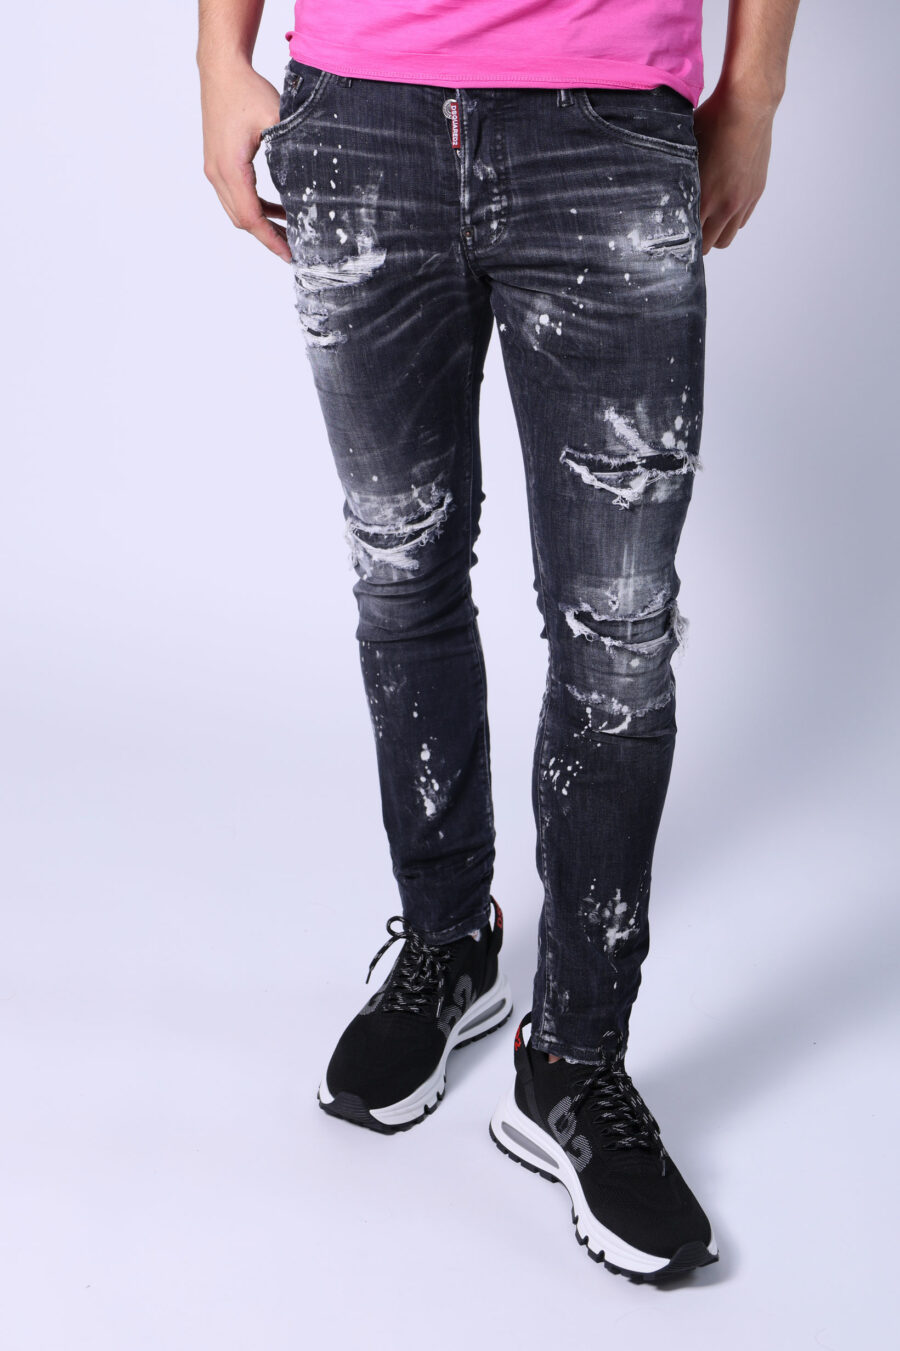 Skater jean trousers black worn out with rips - Untitled Catalog 05546